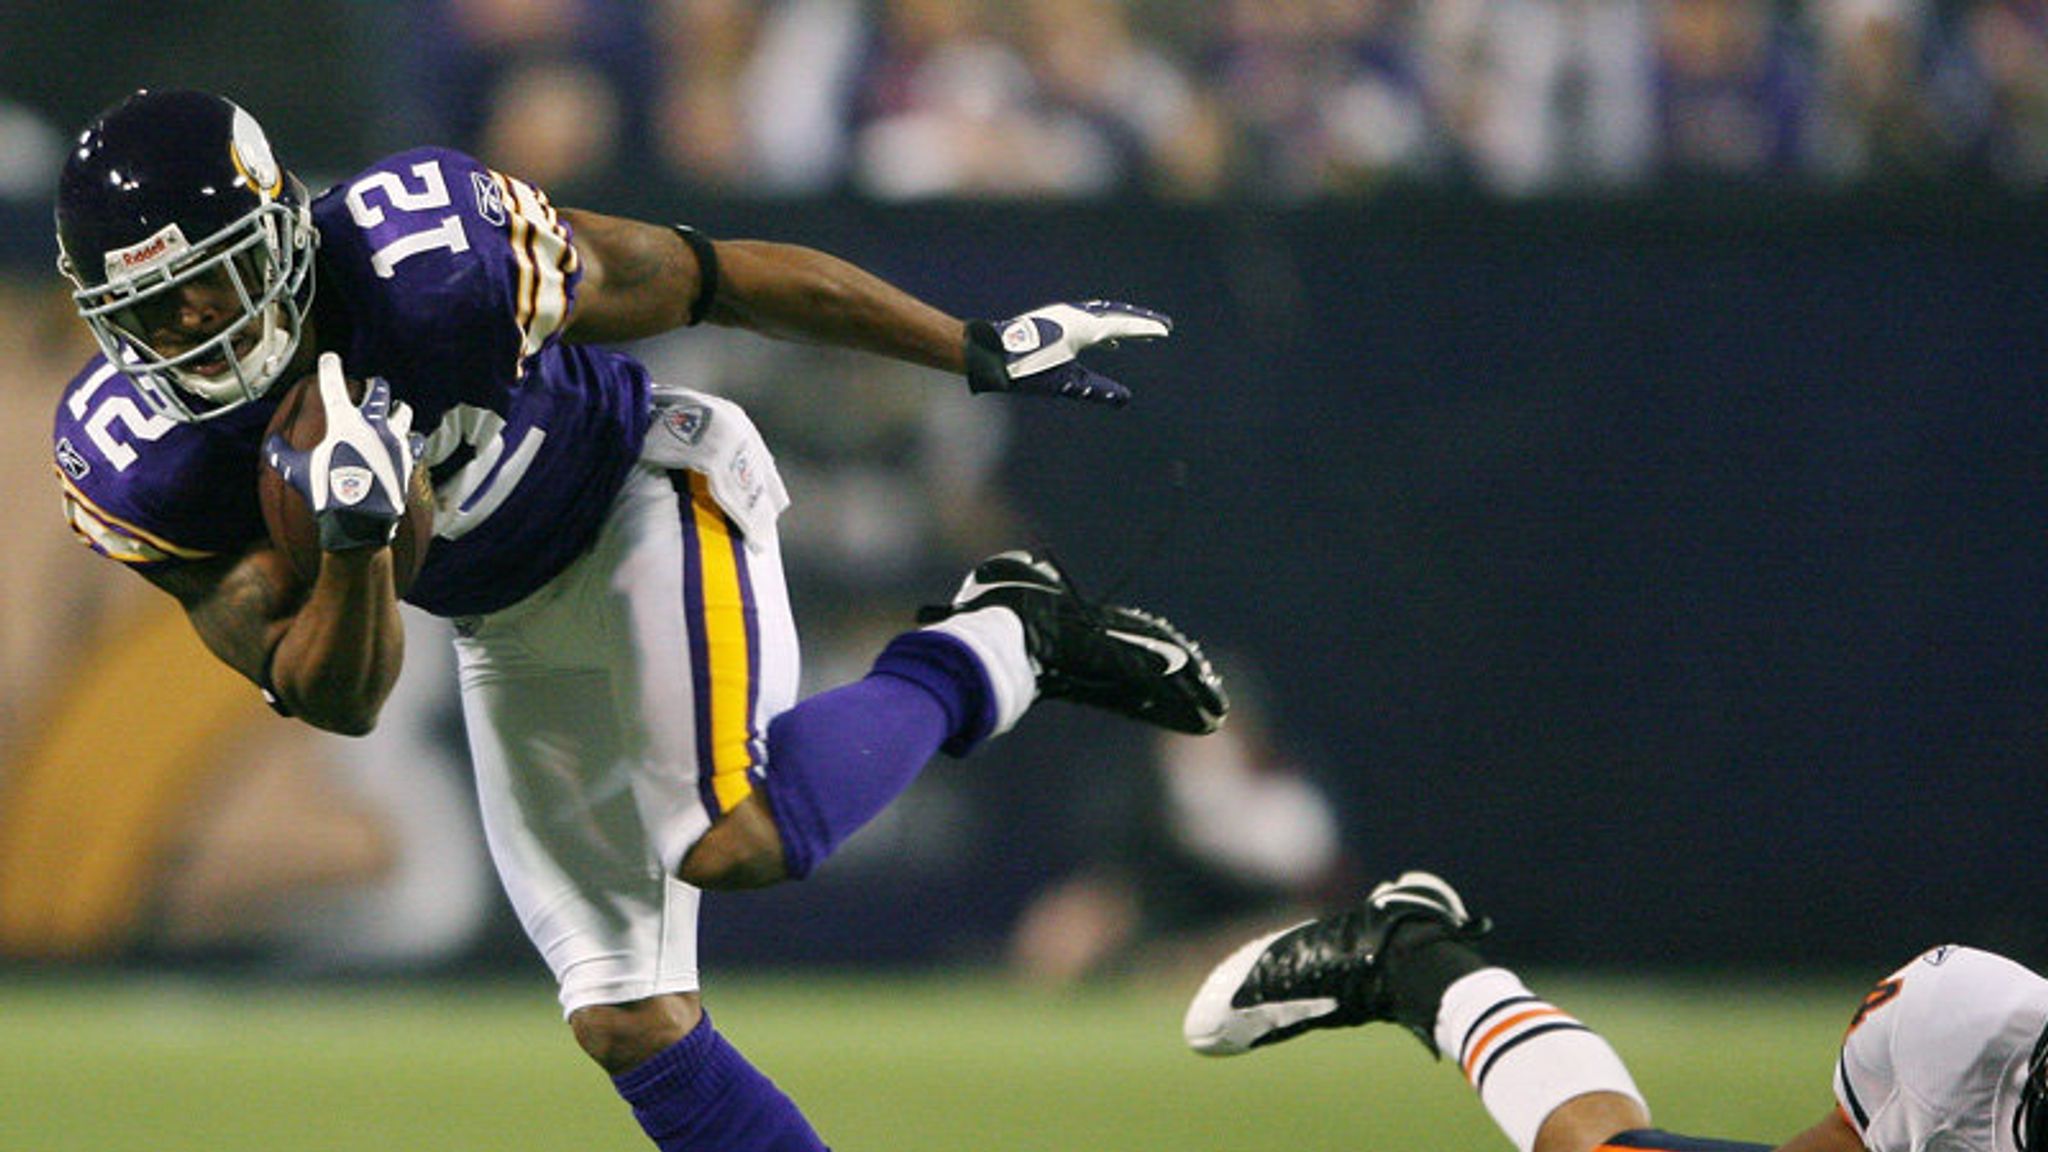 Vikings' Harvin collapses at practice